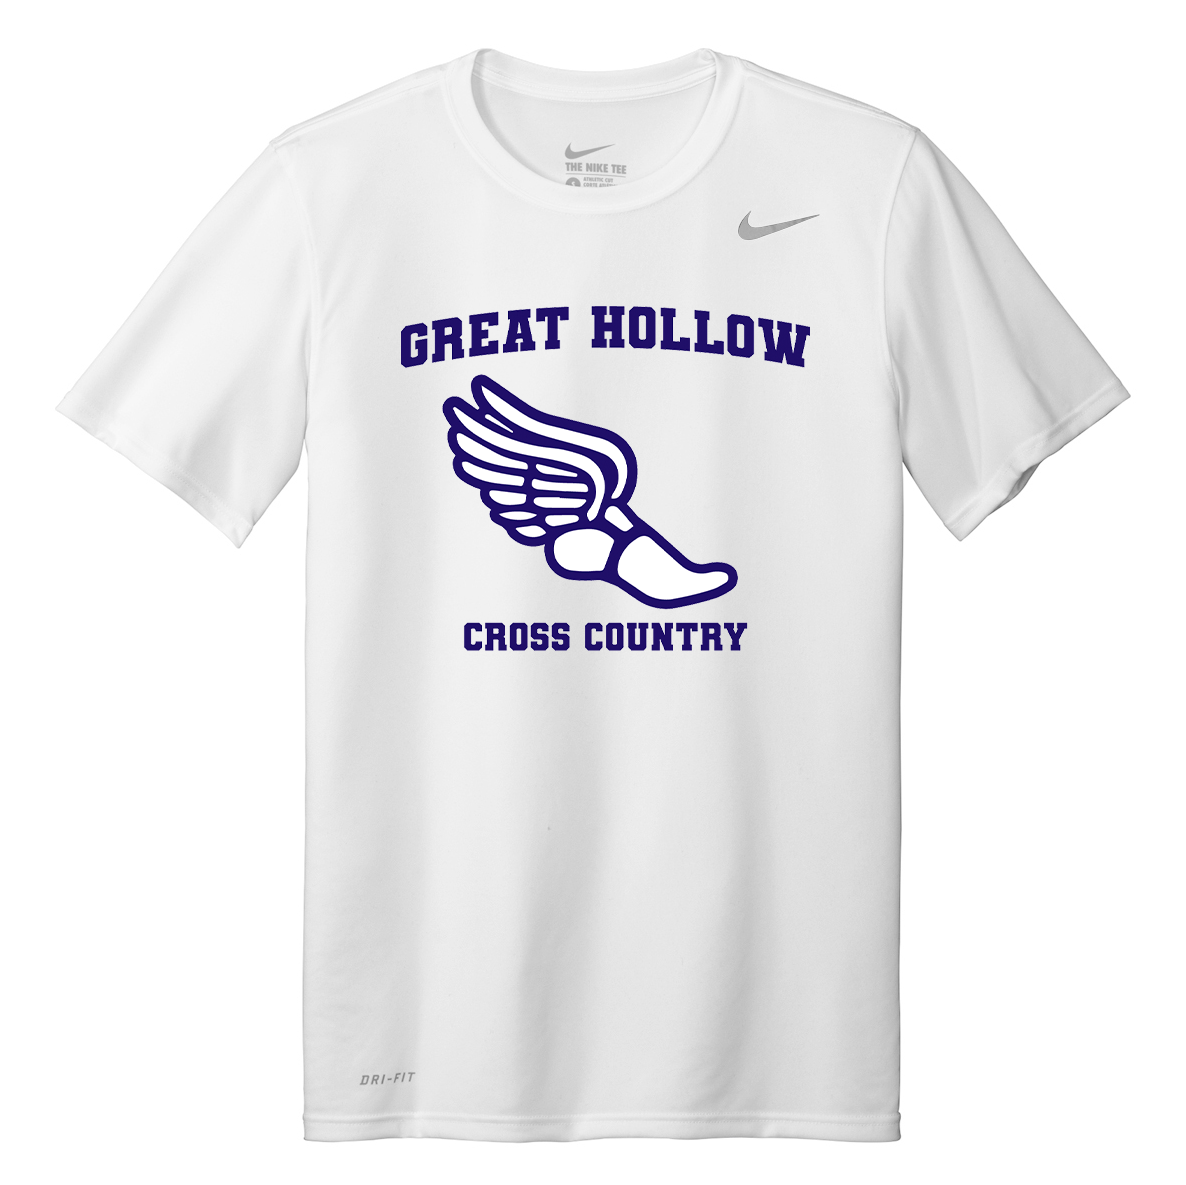 Great Hollow Cross Country Nike Legend Tee